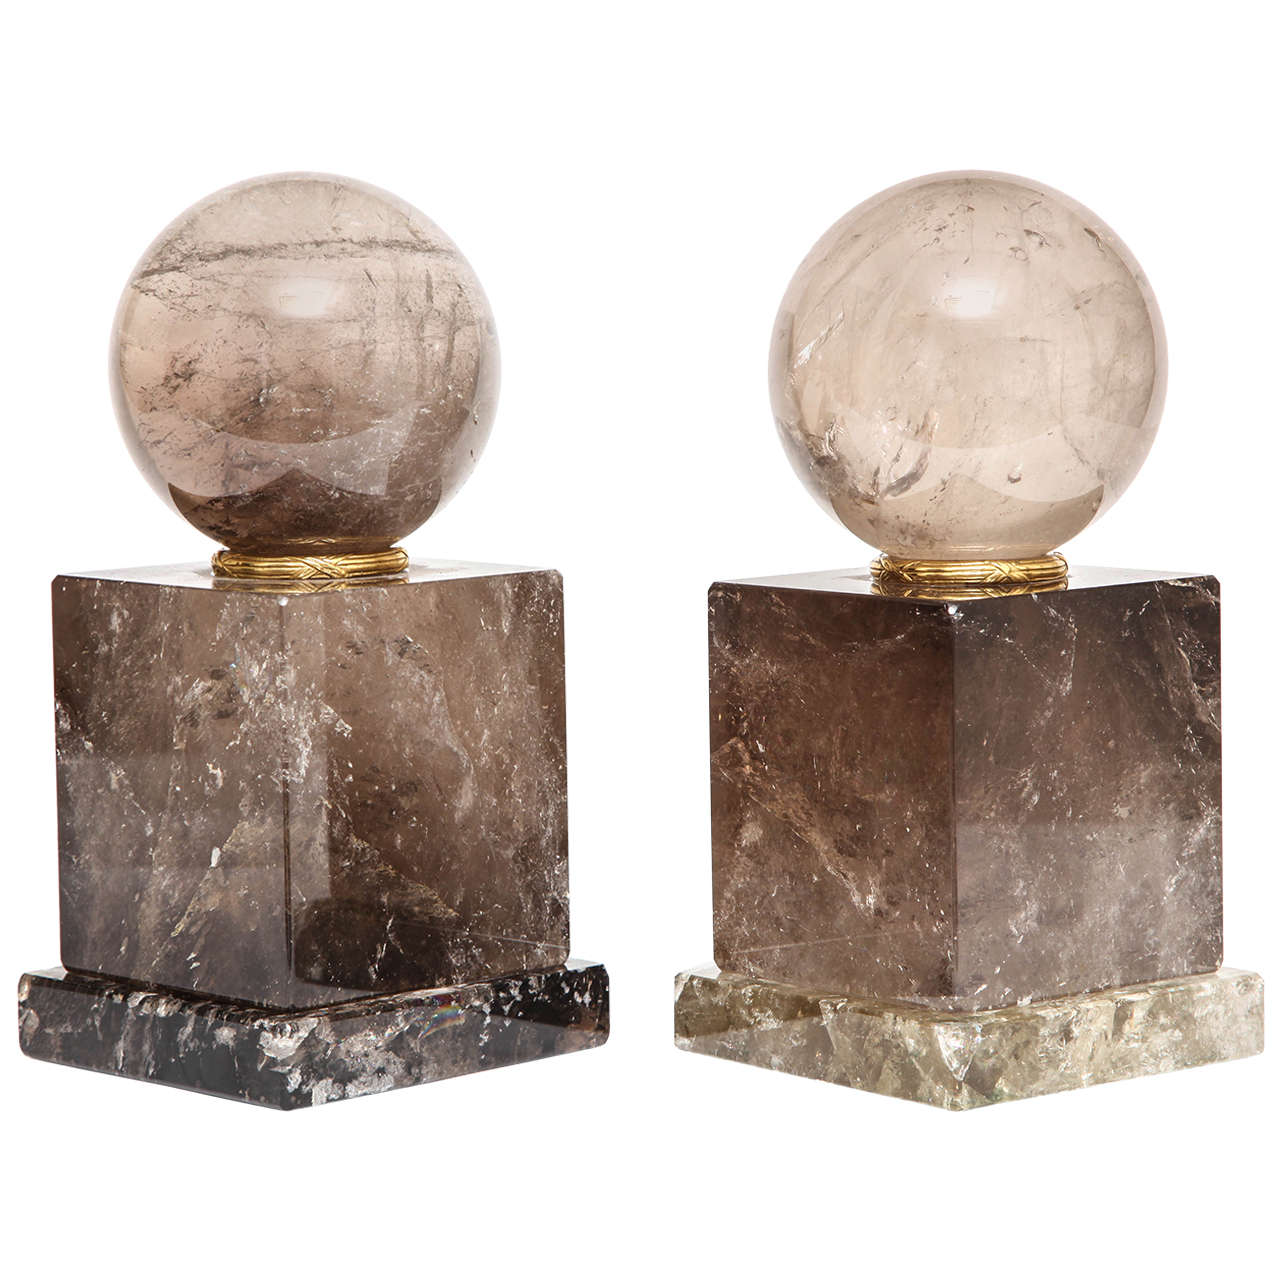 Pair of French Smokey Rock Crystal Orbs or Spheres on Plinths with Gilt Bronze